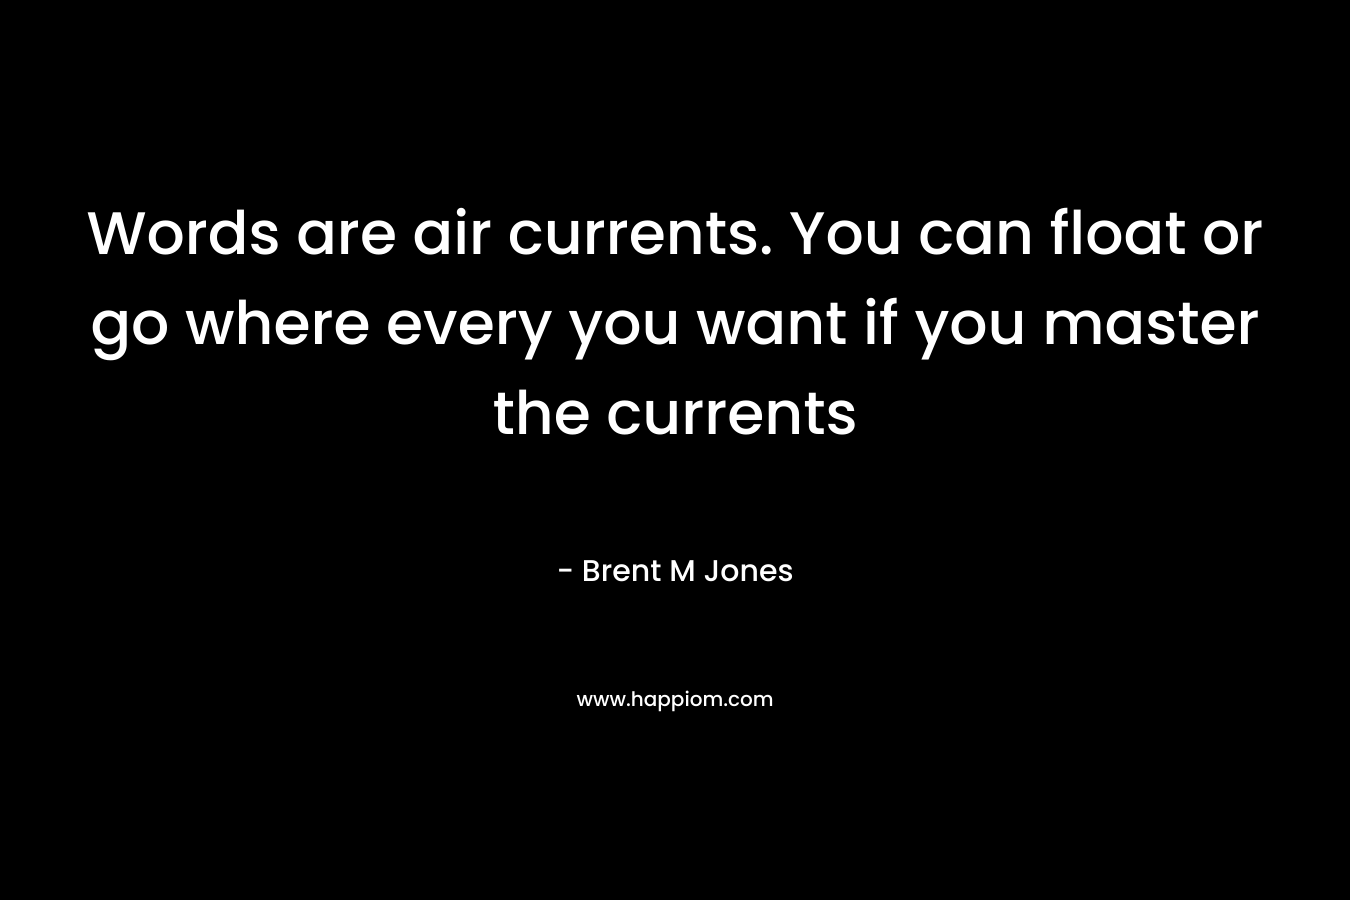 Words are air currents. You can float or go where every you want if you master the currents – Brent M Jones